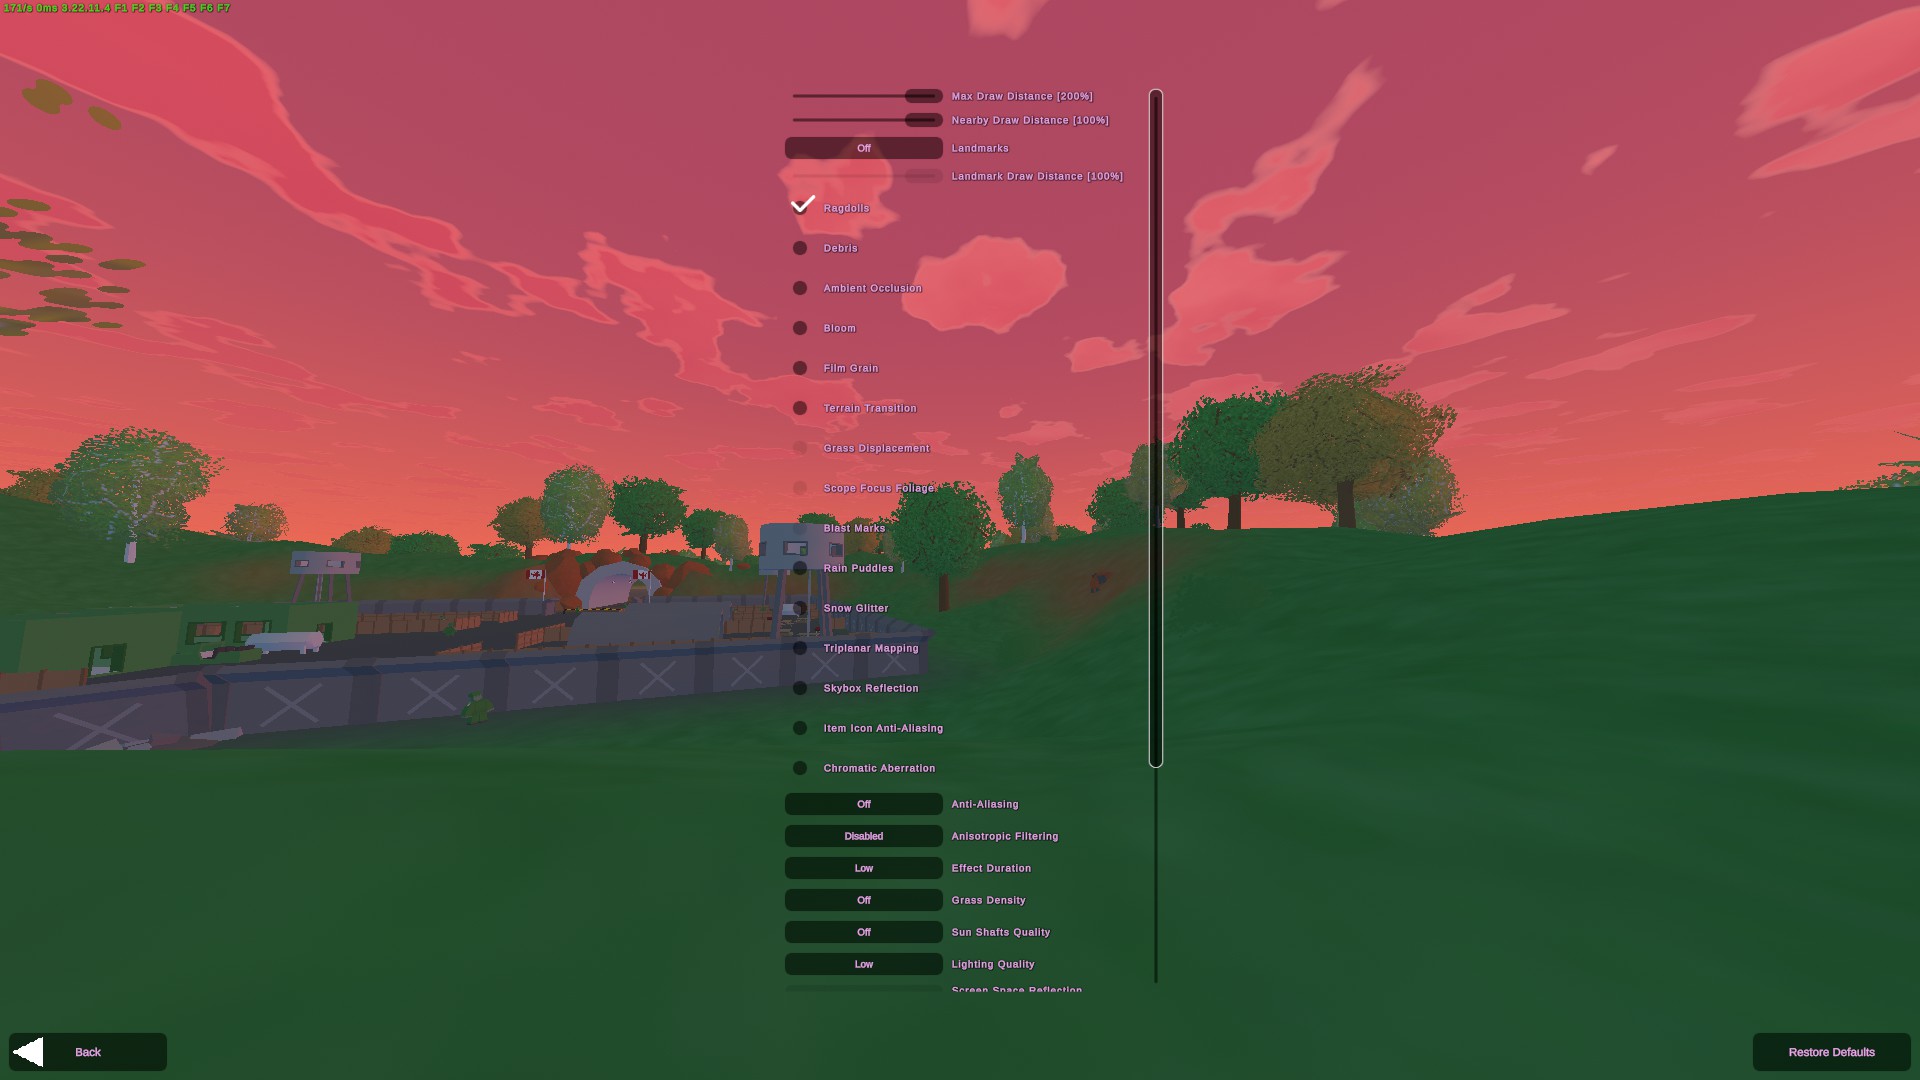 Unturned - Best PVP graphics settings for visibility - Settings - 9BB21B2